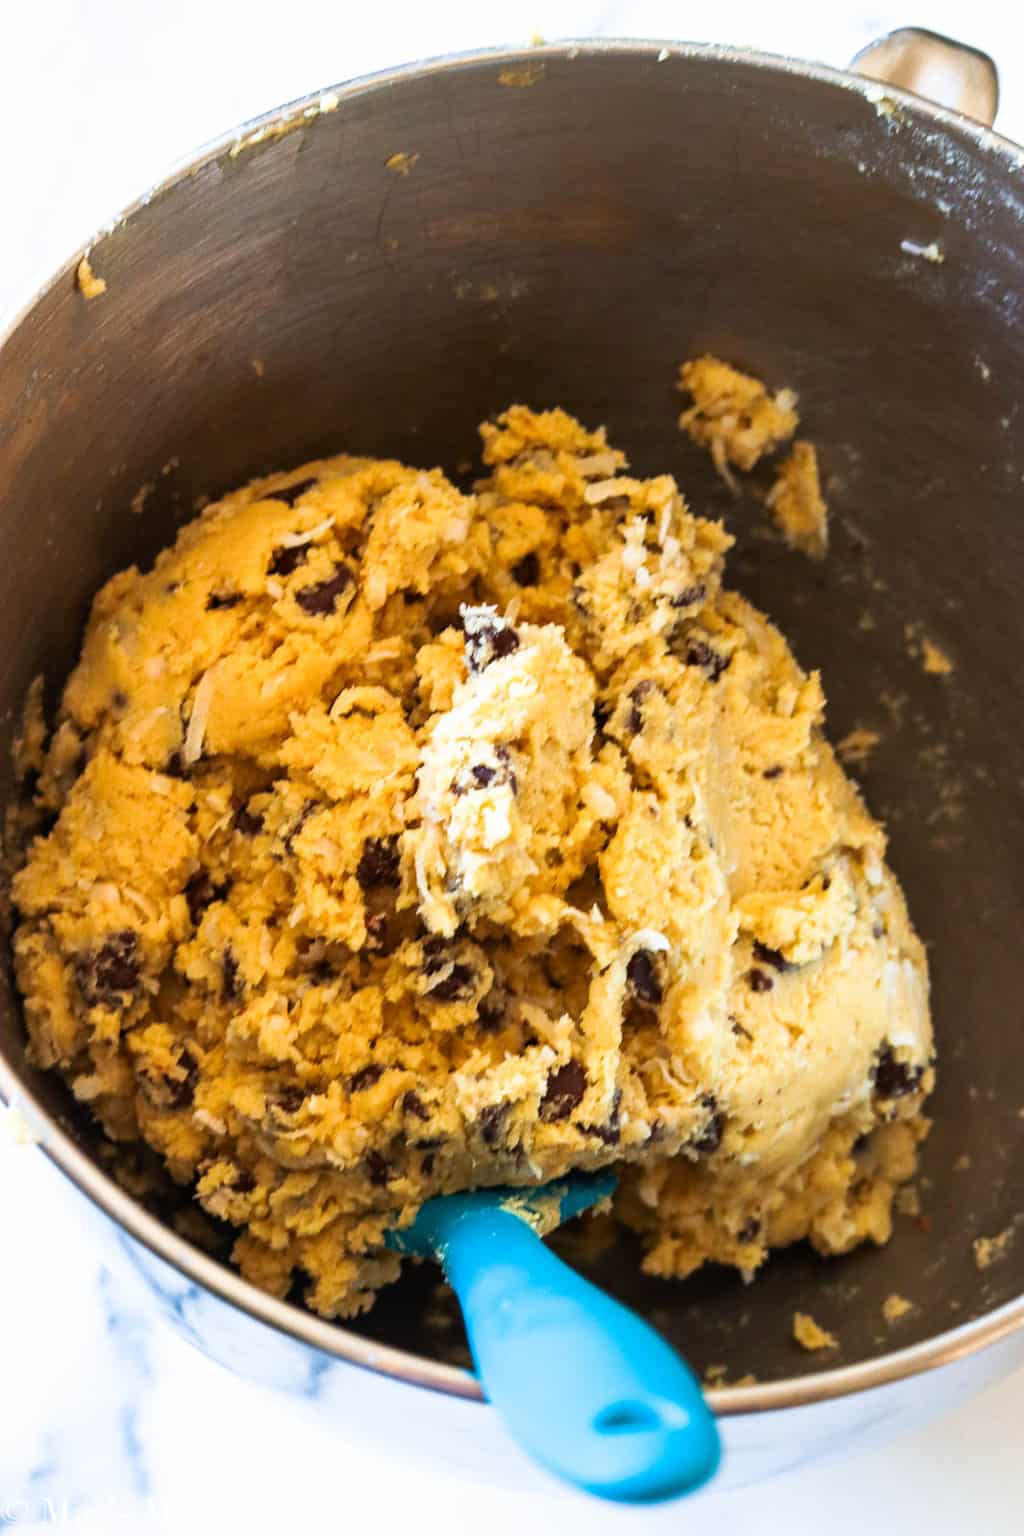 A mixing bowl of chocolate chip coconut cookie dough